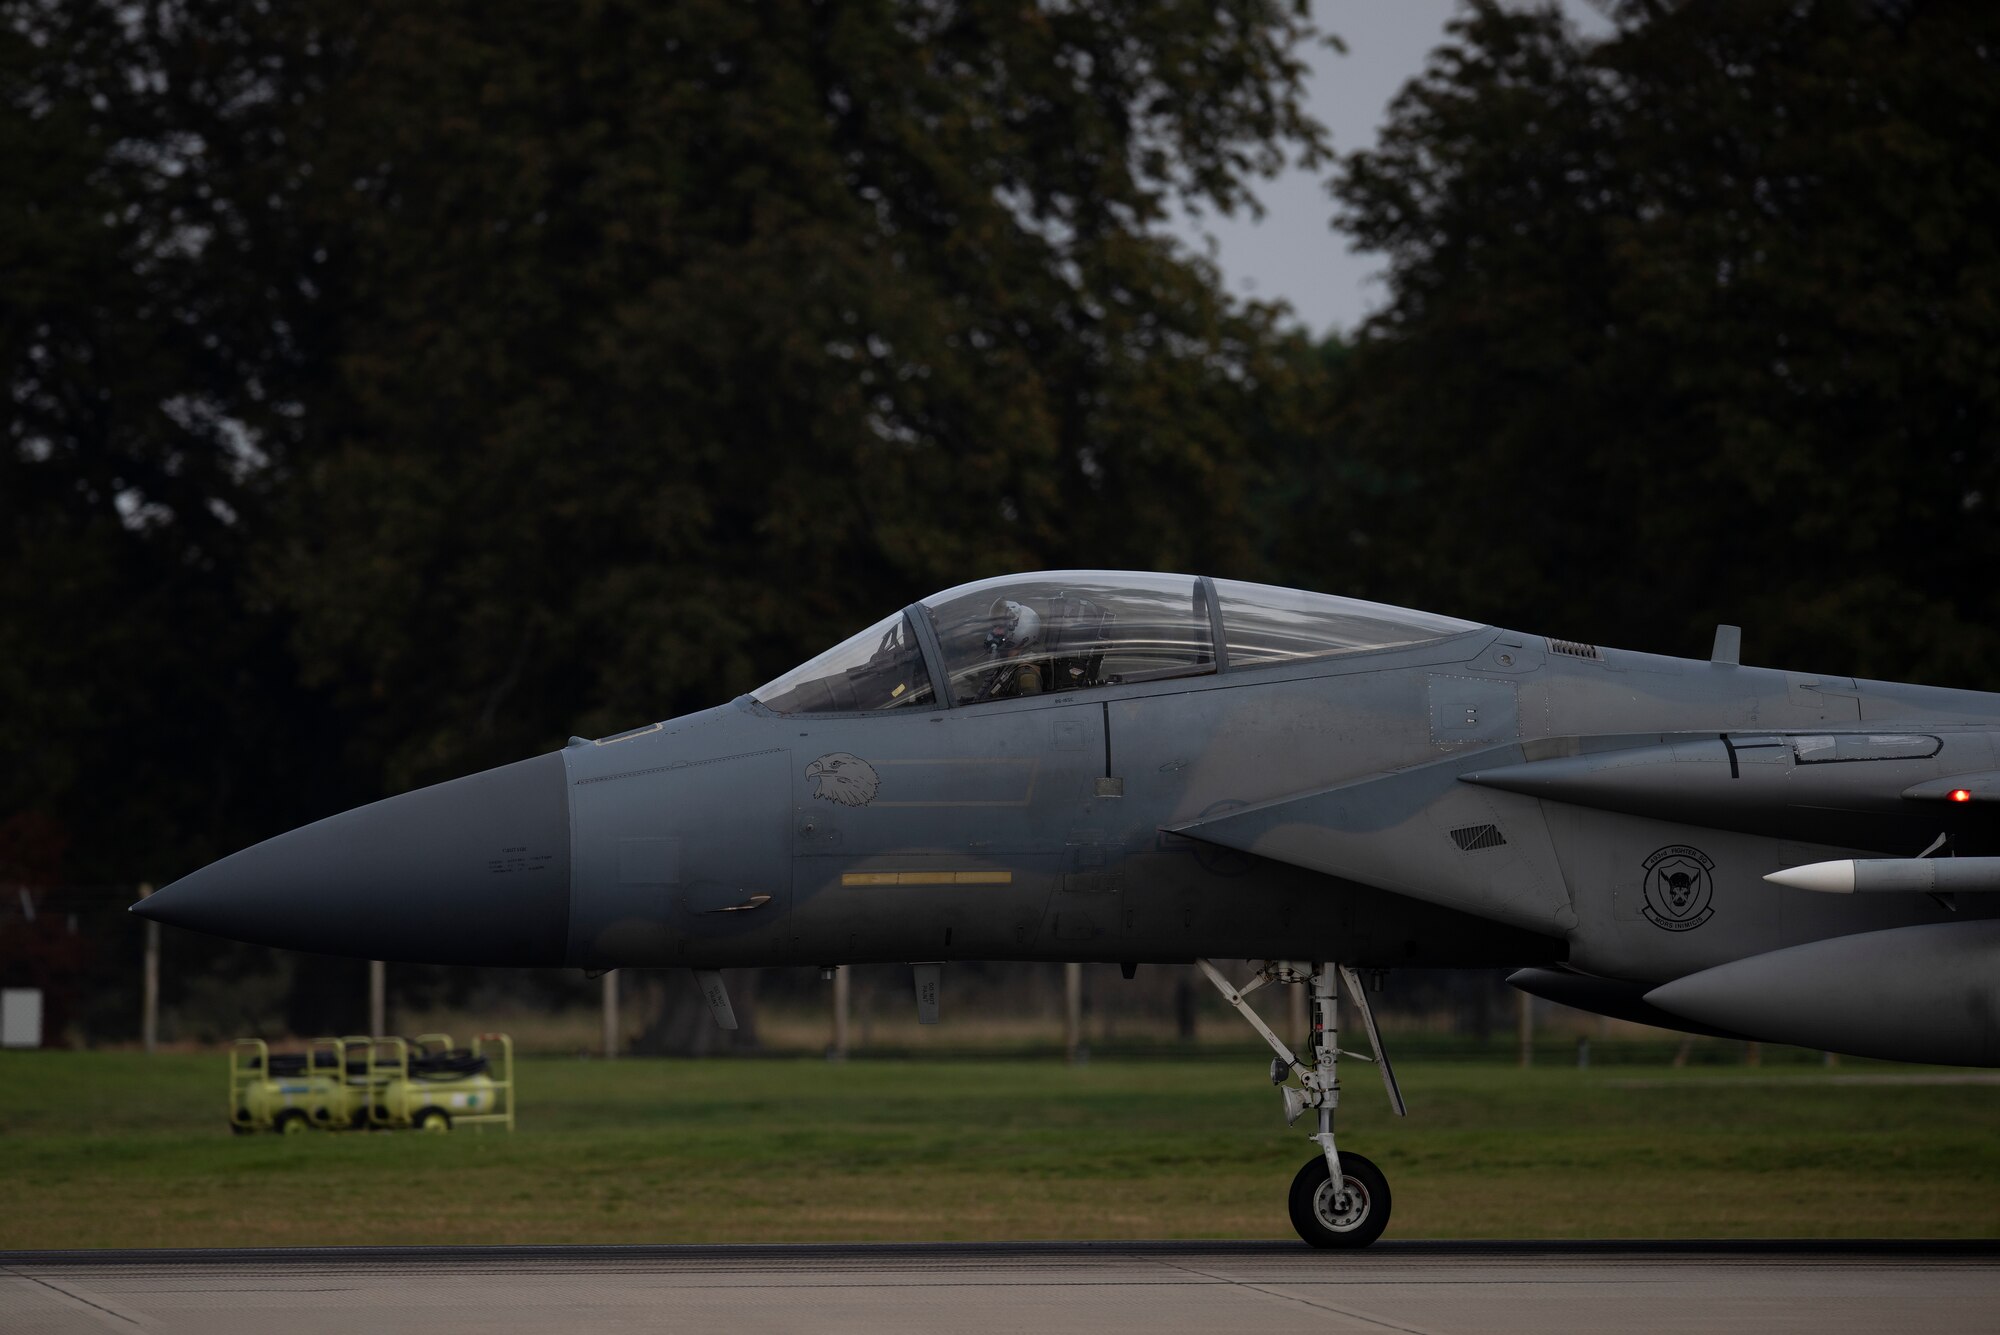 An F-15C Eagle, assigned to the 493rd Fighter Squadron, prepares to take off in support of exercise Astral Knight 2020 at Royal Air Force Lakenheath, England, Sept. 21, 2020. AK20 is focused on multinational Integrated Air and Missile Defense assets and will feature fighter and surface-based air defense integration against air and cruise missile threats. (U.S. Air Force photo by Airman 1st Class Jessi Monte)